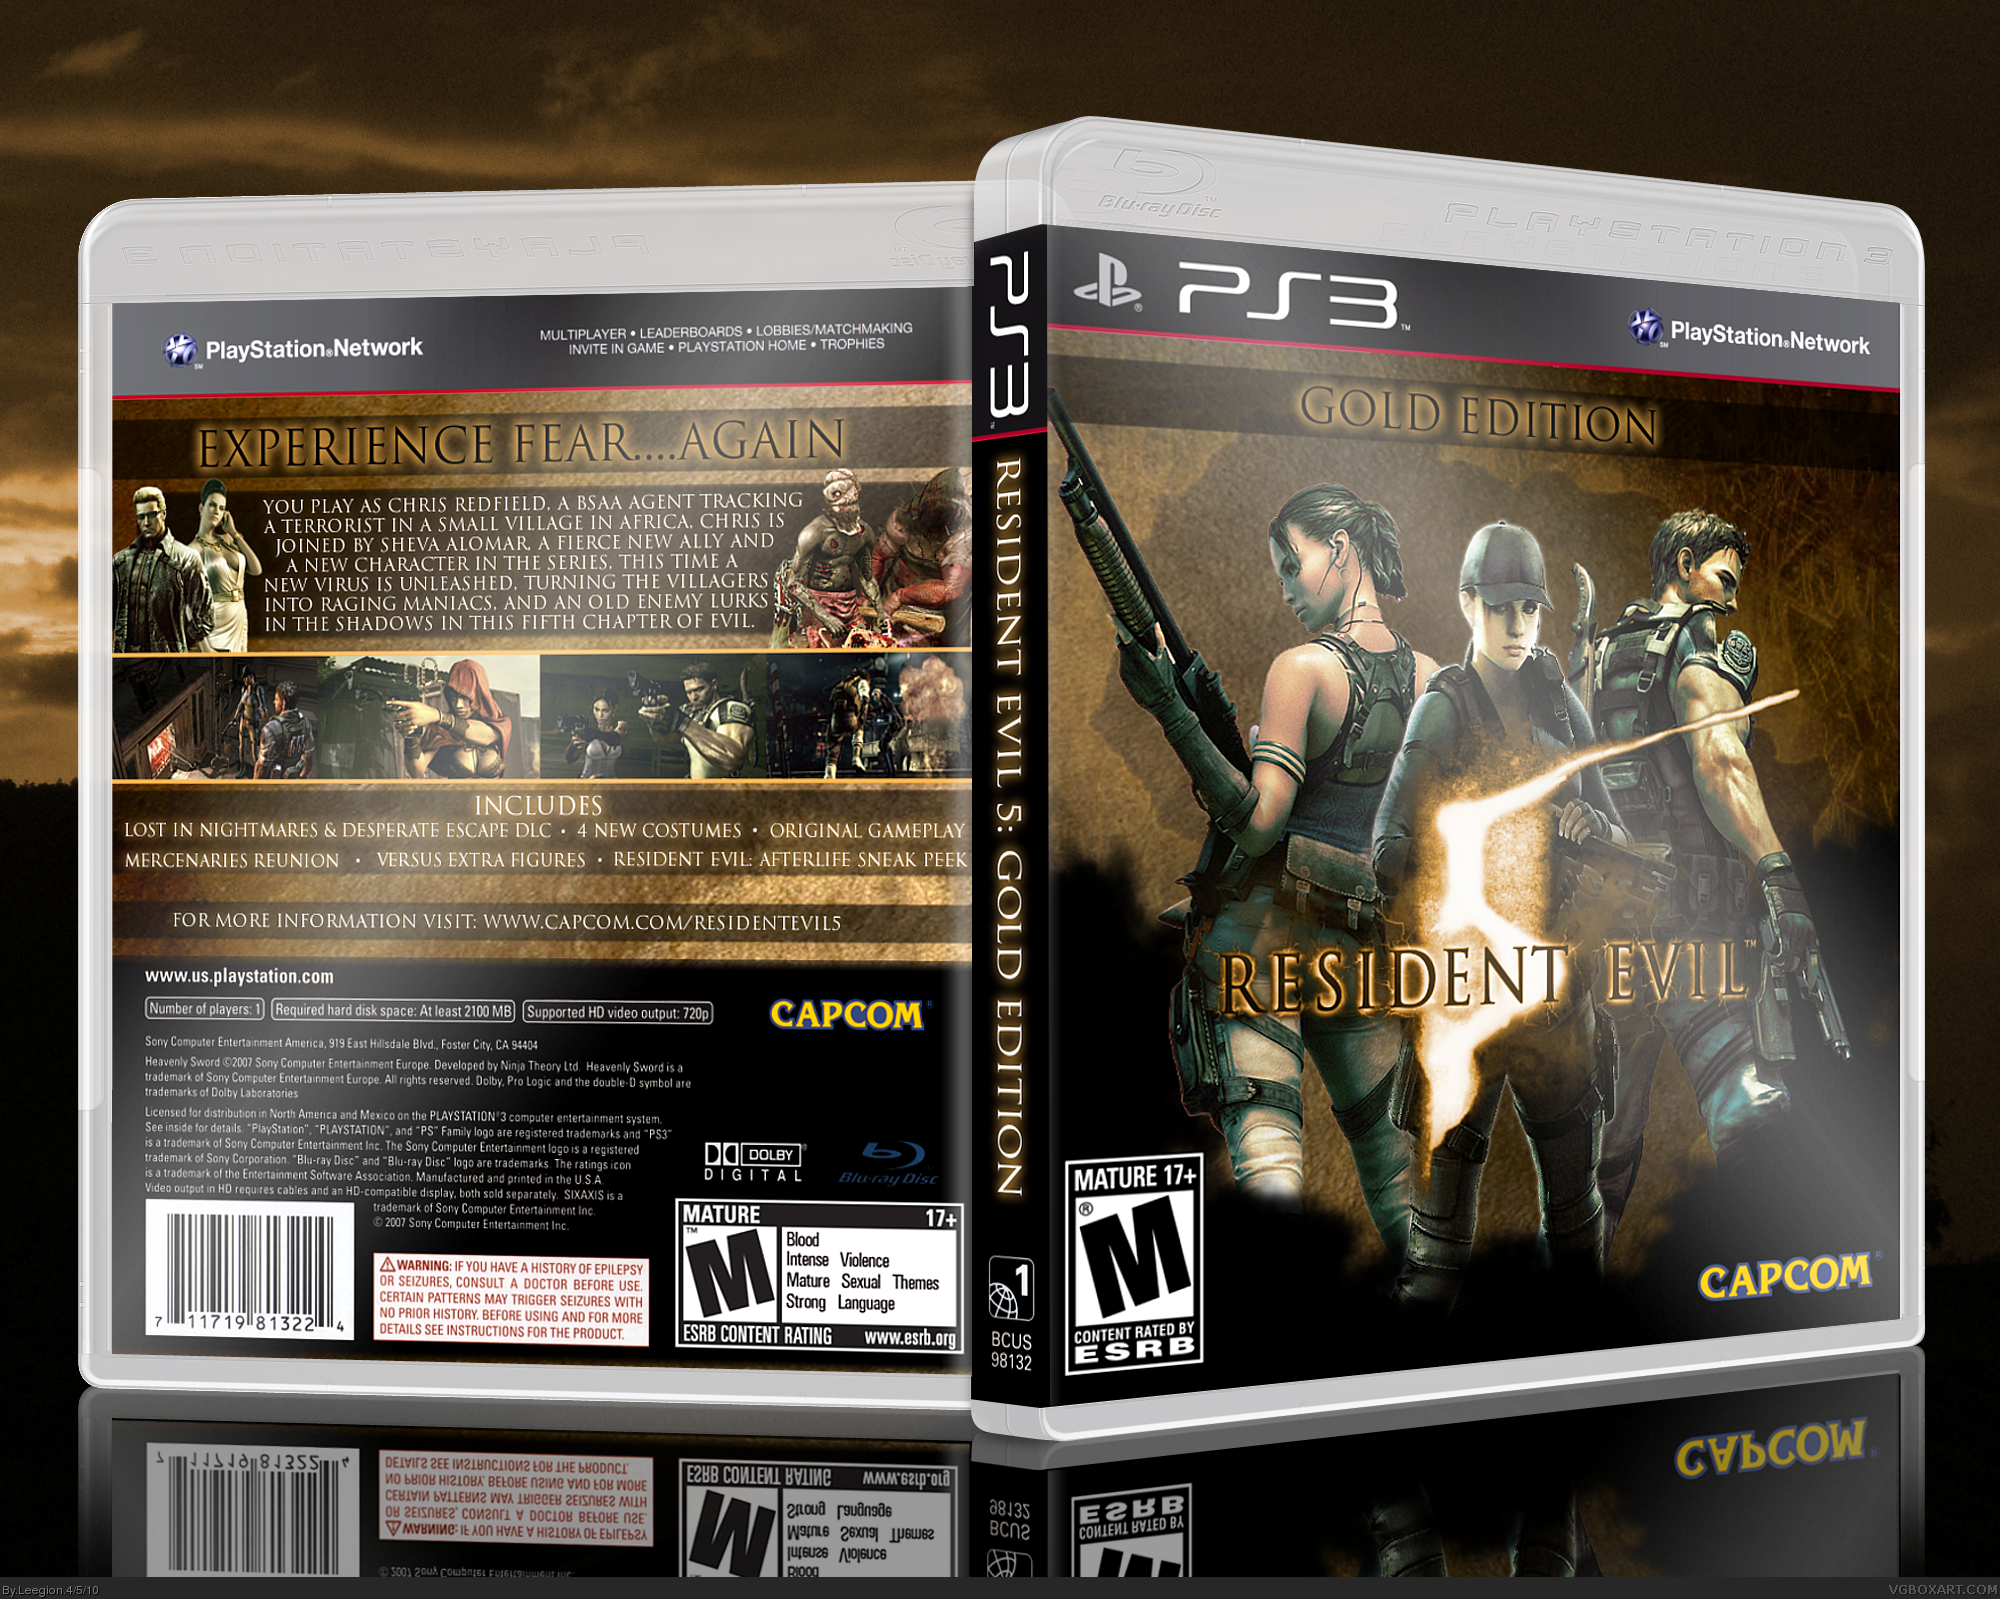 Resident evil 3 ps5. Resident Evil 5 Gold Edition ps3. Диск Resident Evil Gold Edition. Resident Evil 5 ps3 обложка. Resident Evil 5 Gold Edition ps3 Disc.